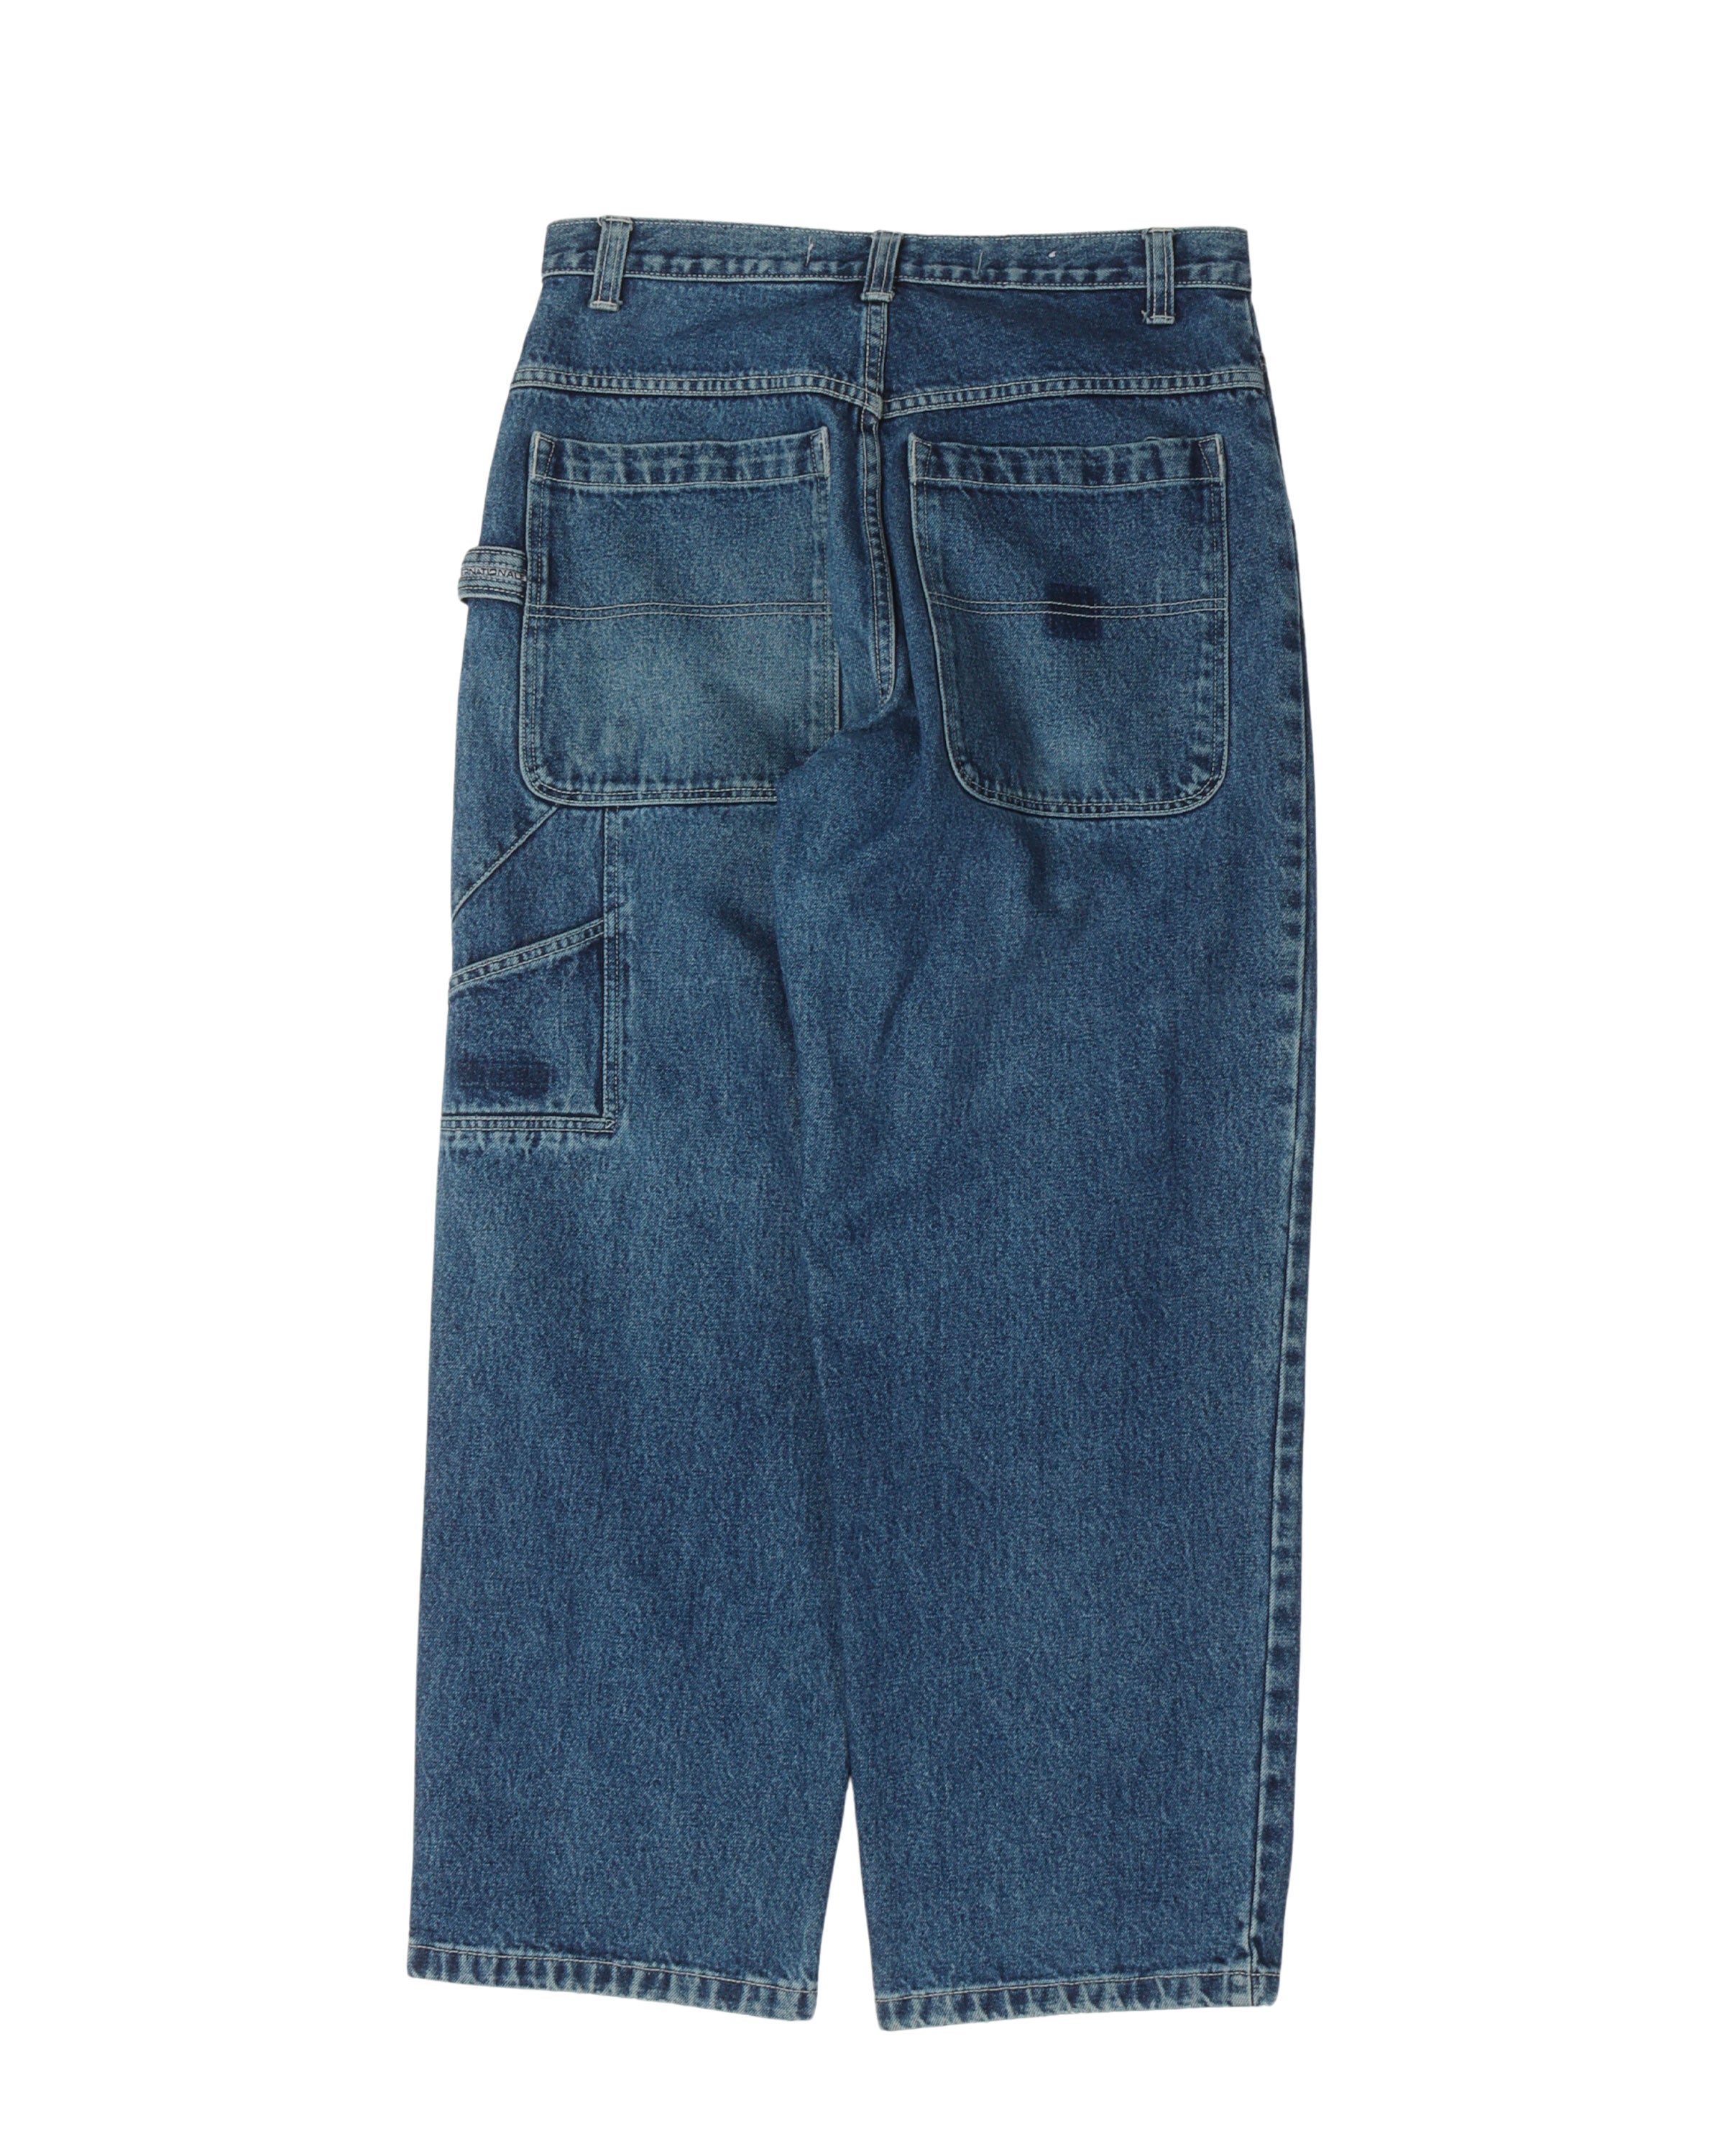 Paco Jean Co. Jeans